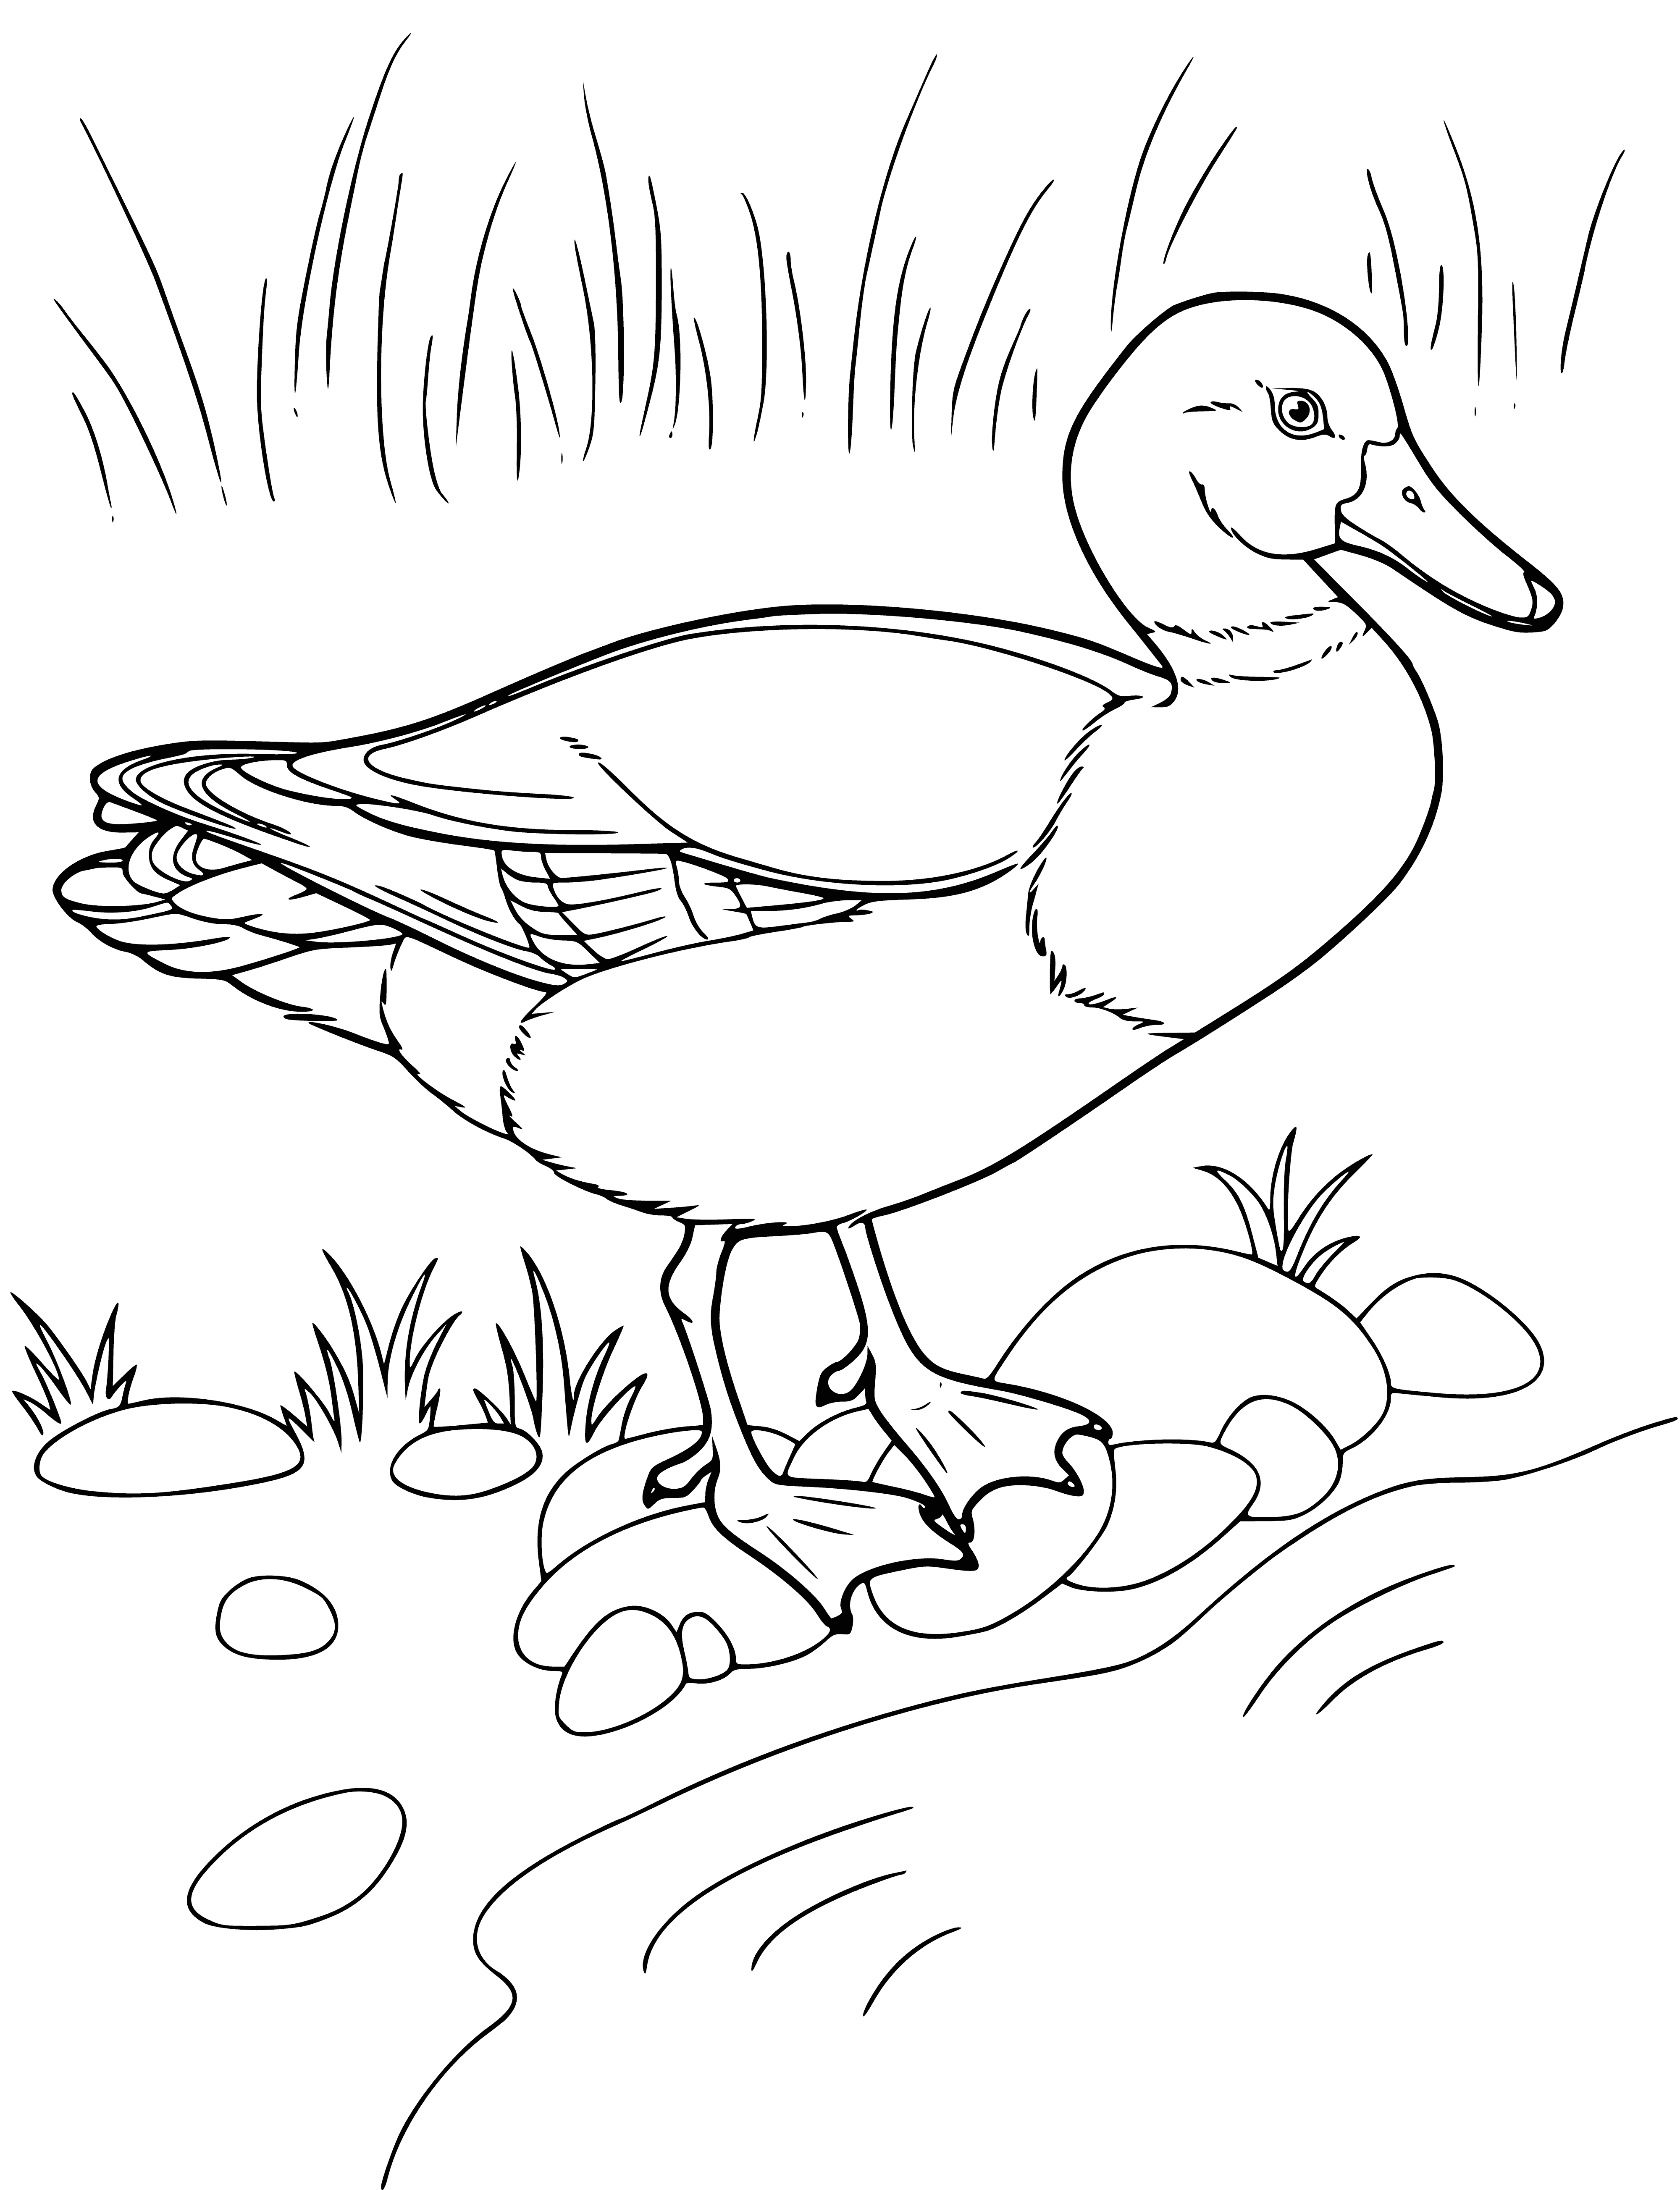 coloring page: The duck has a yellow beak, webbed feet, mostly white body and brownish-gray head. Swimming in water.